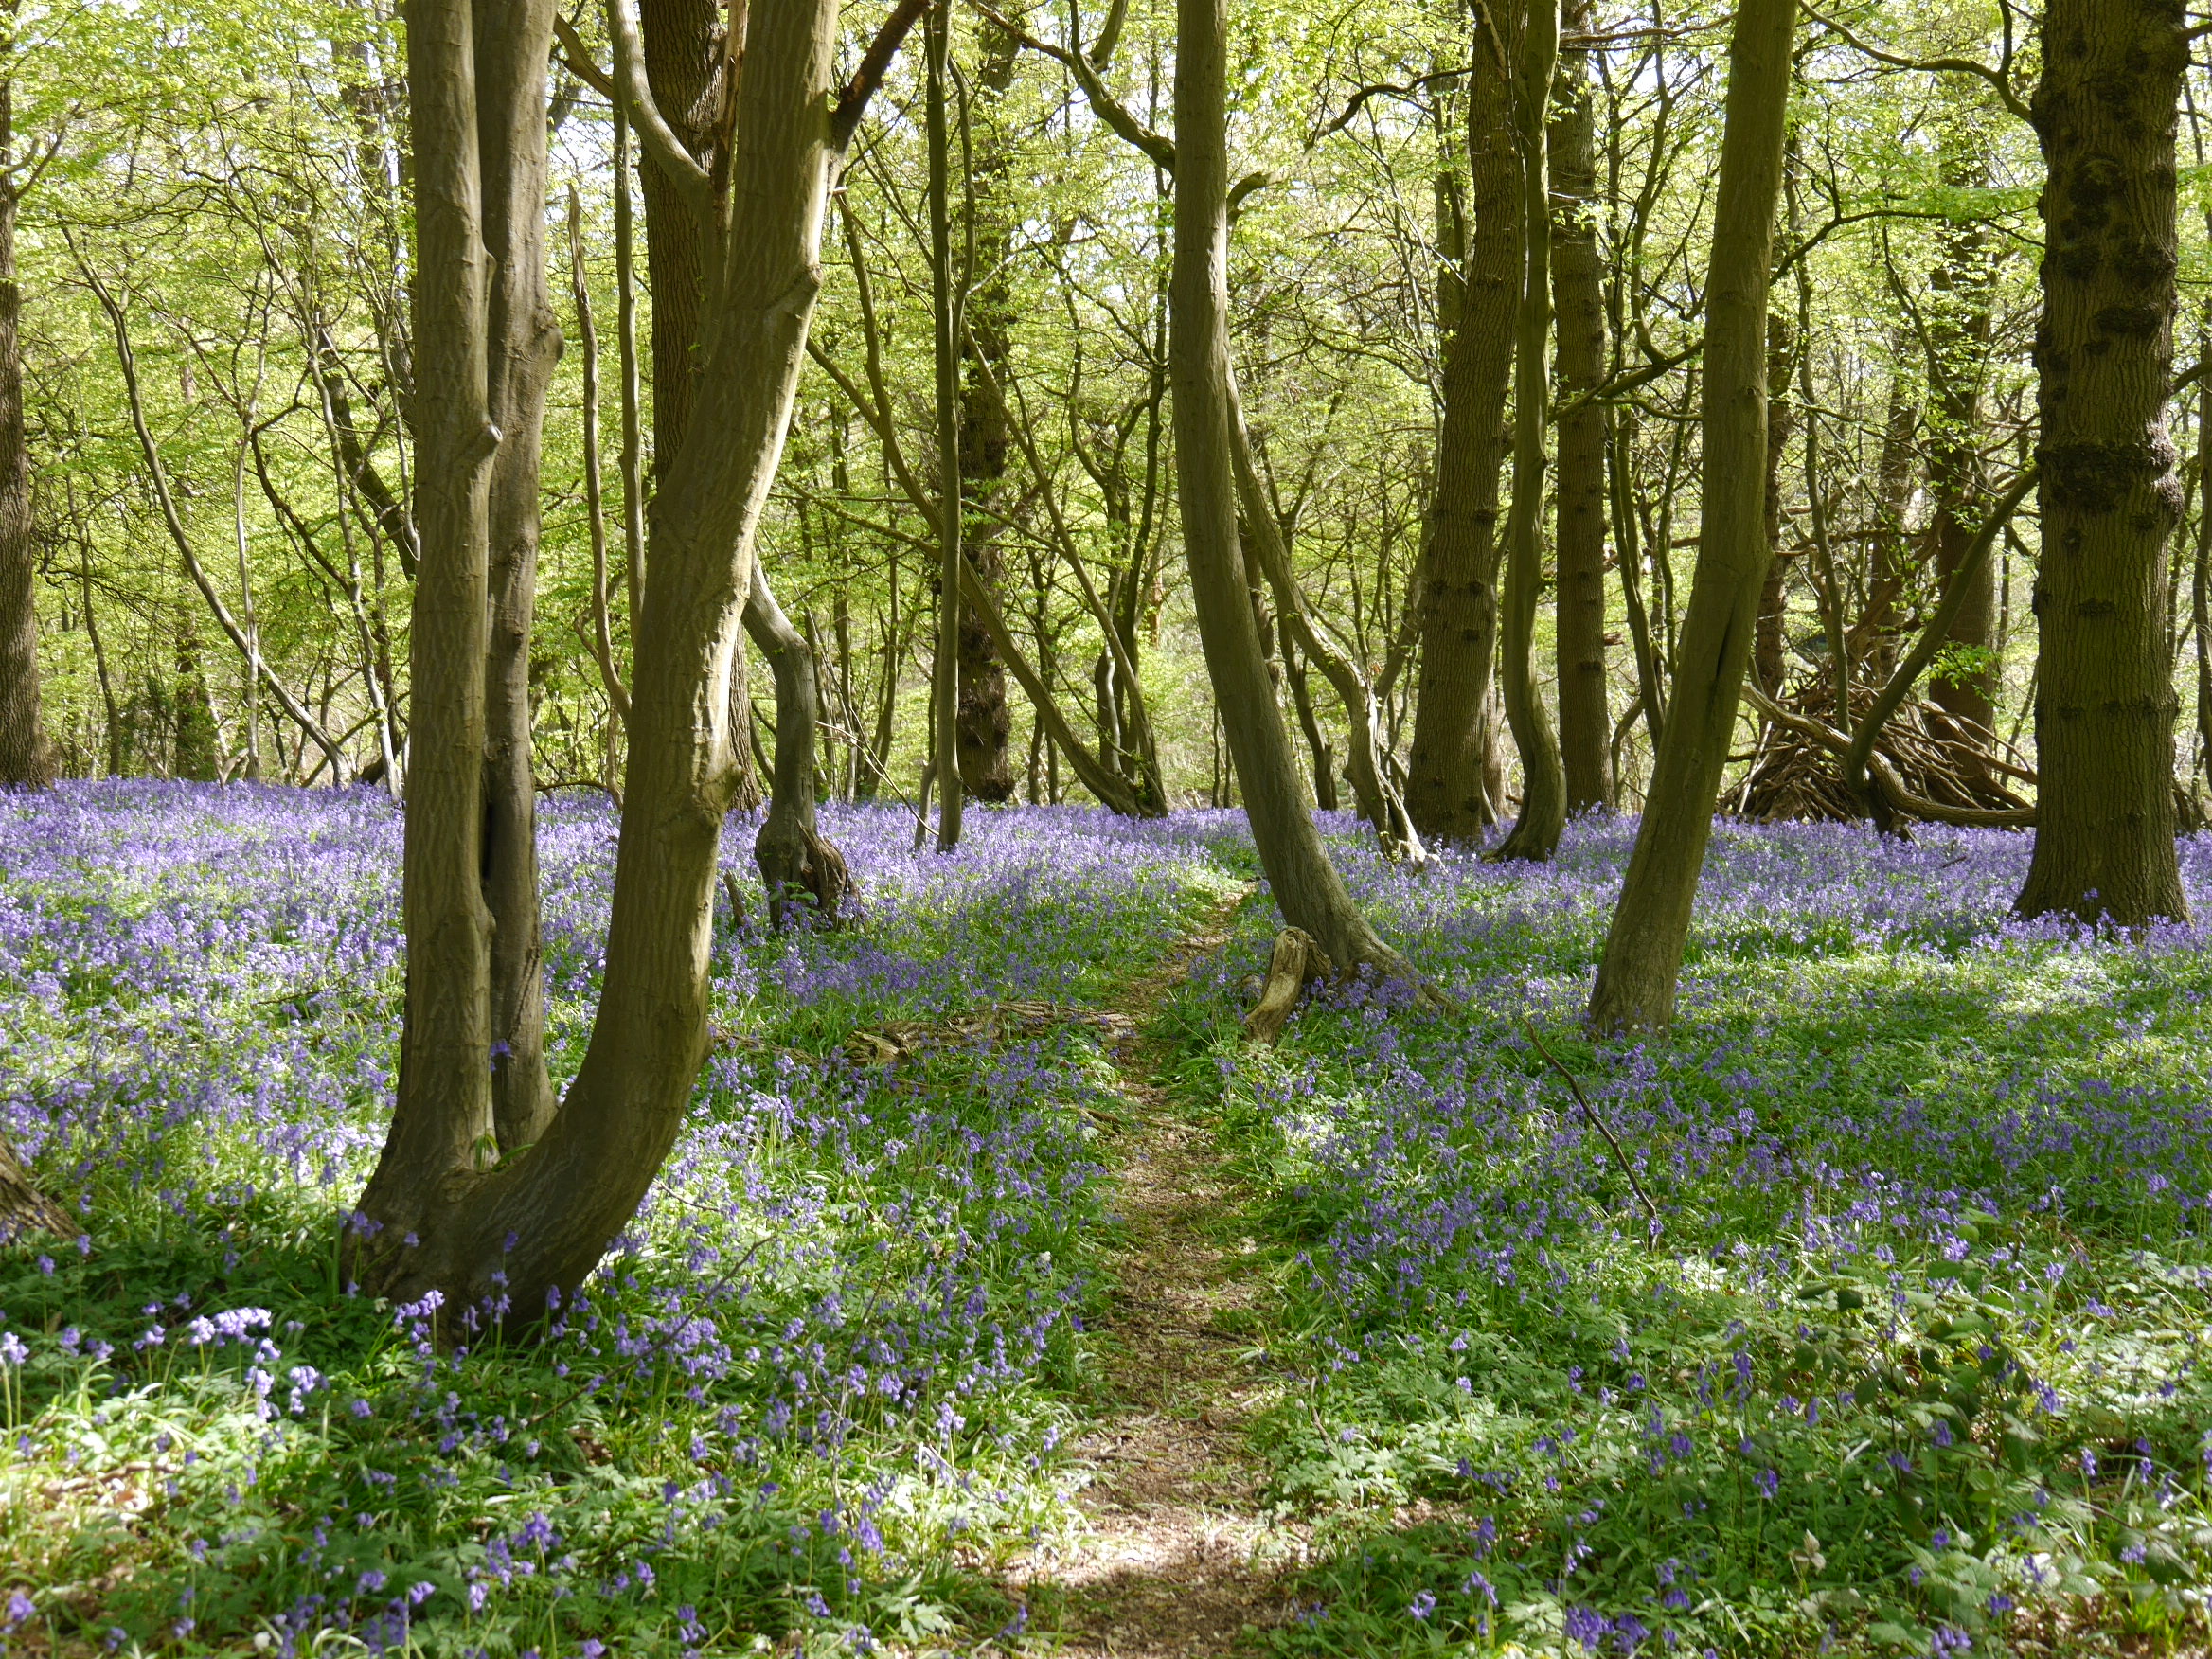 Image of Hornecourt Wood with Bluebells amongst the trees